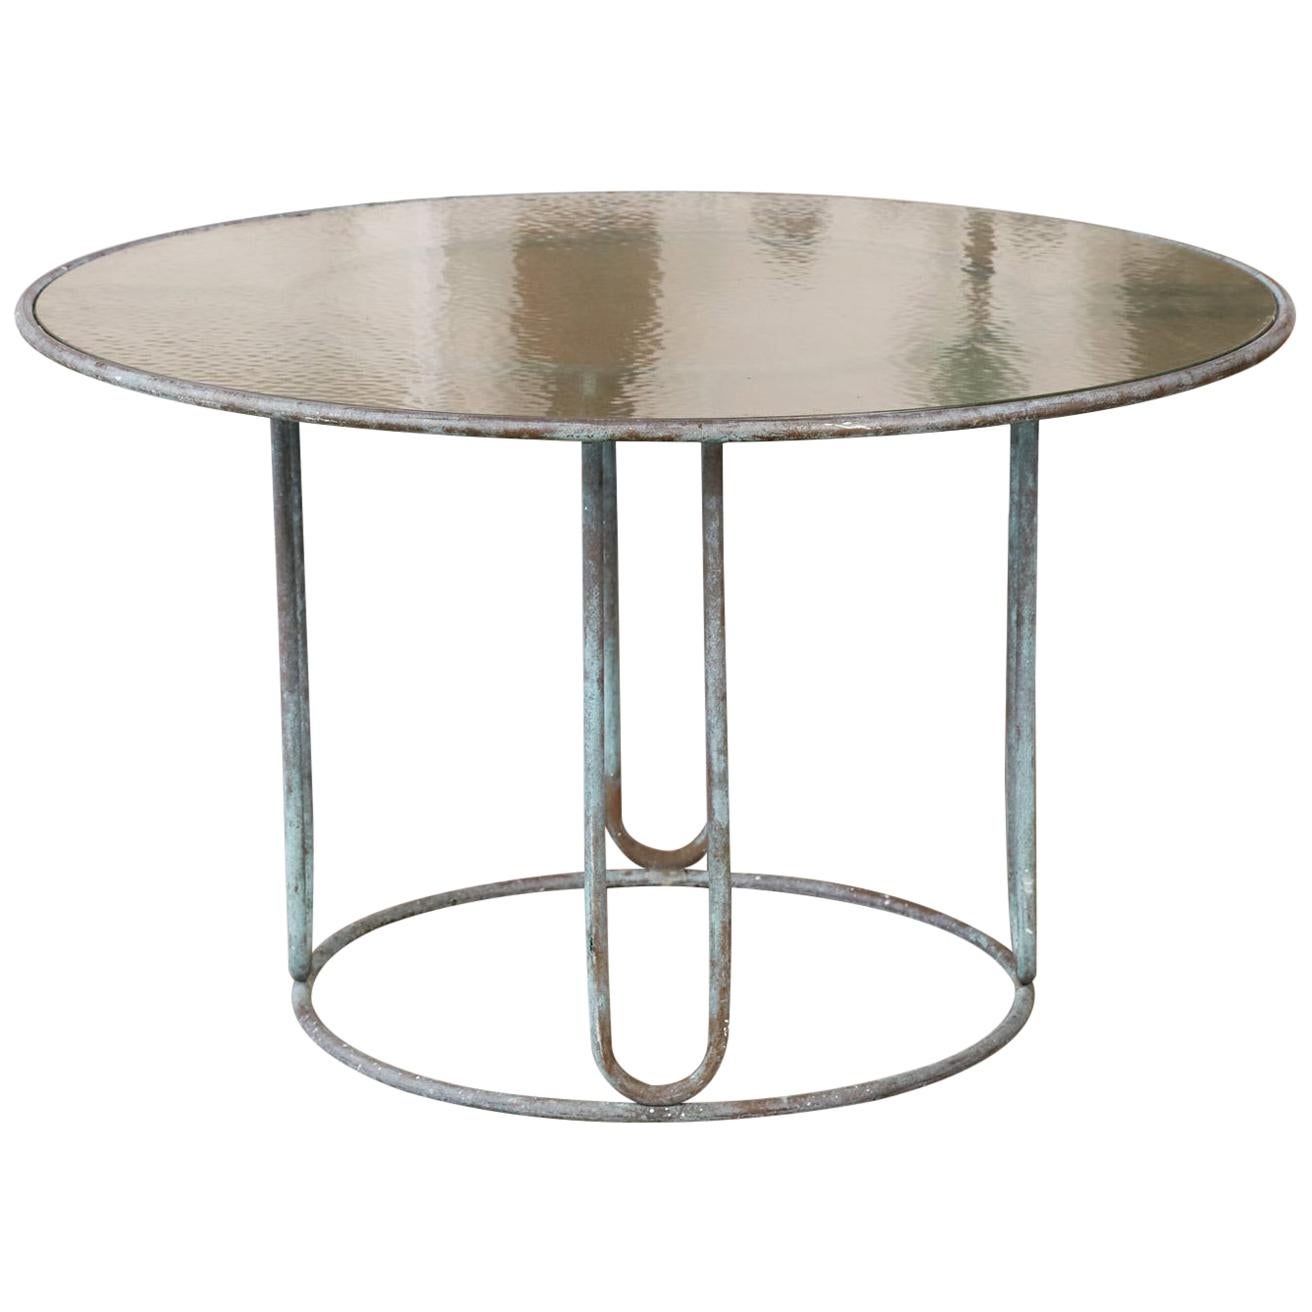 Round Patio Table with Oxidized Bronze Frame by Walter Lamb for Brown Jordan